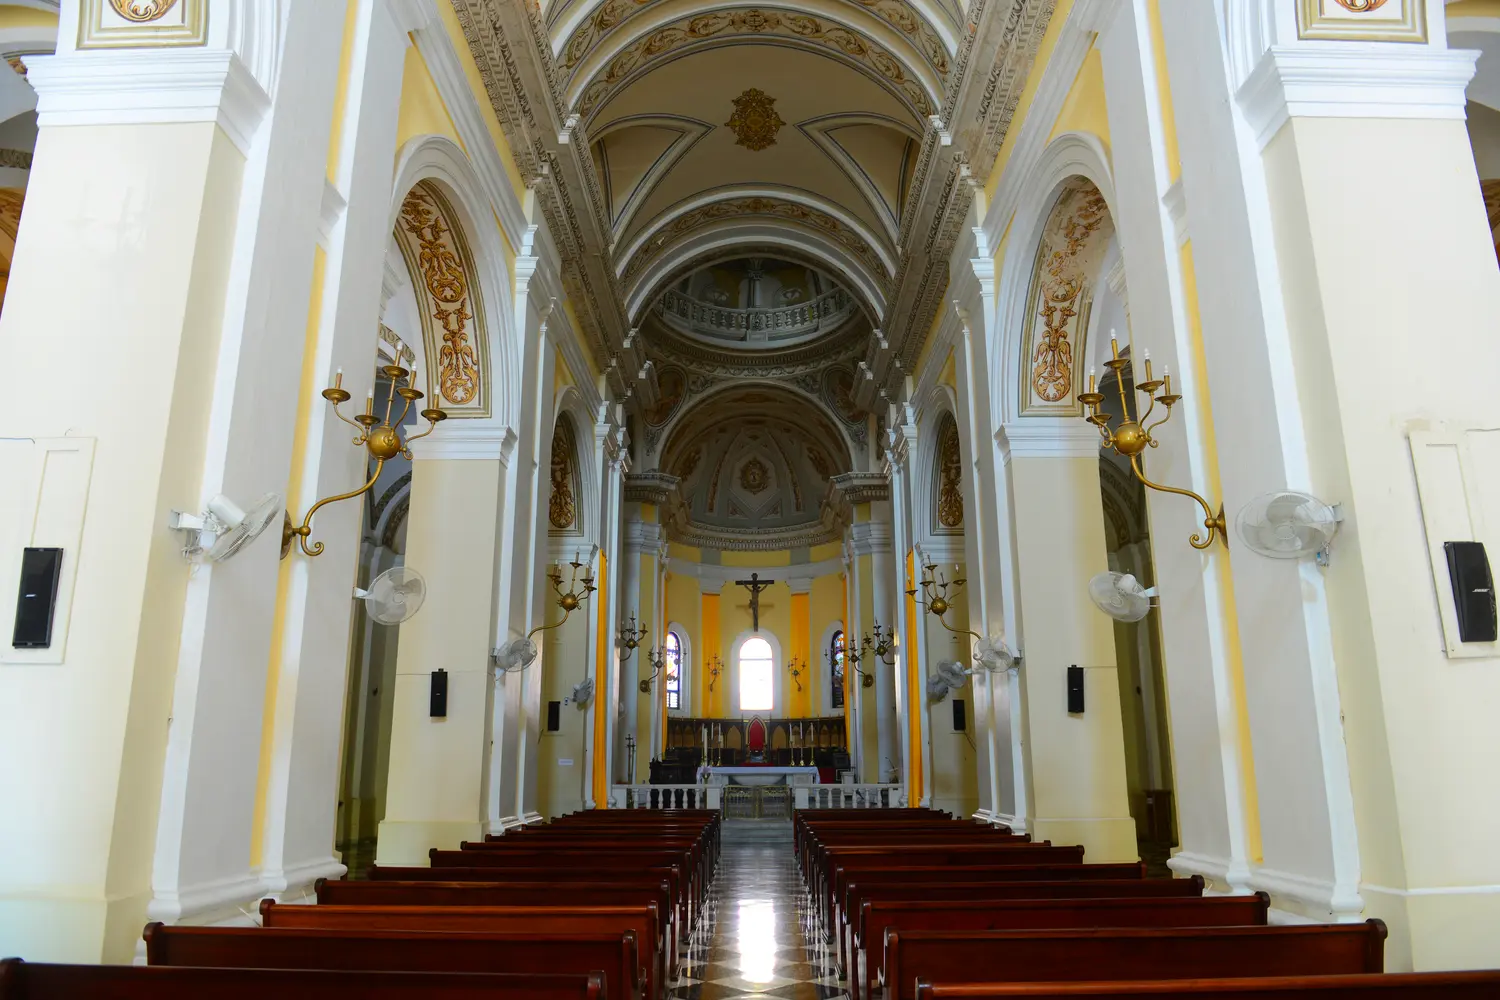 Cathedral of San Juan Bautista is a Roman Catholic cathedral in Old San Juan, Puerto Rico.